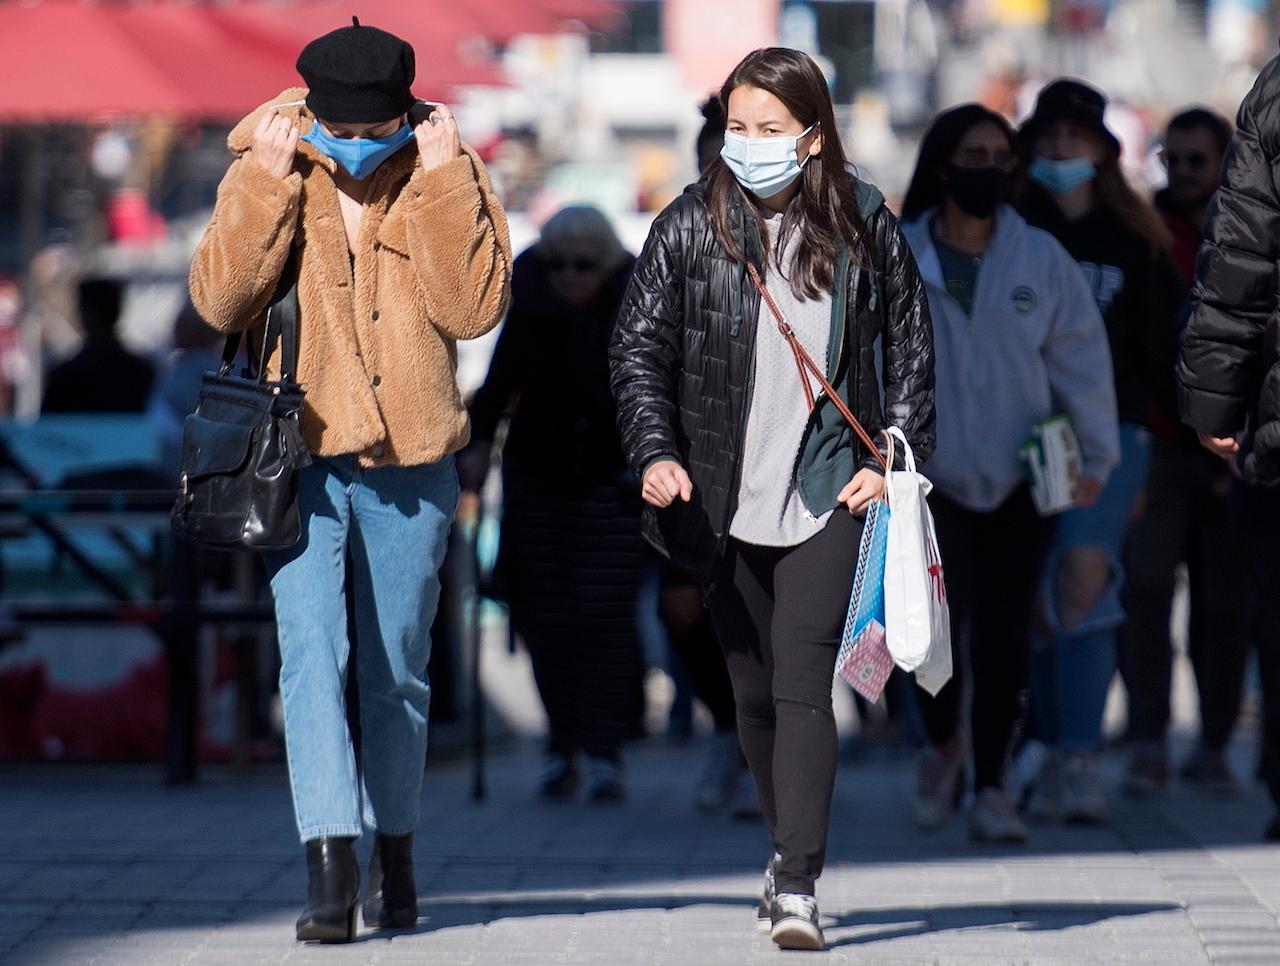 People wear face masks on a street in Montreal on Sept 20, as the Covid-19 pandemic continues in Canada and around the world. Photo: AP